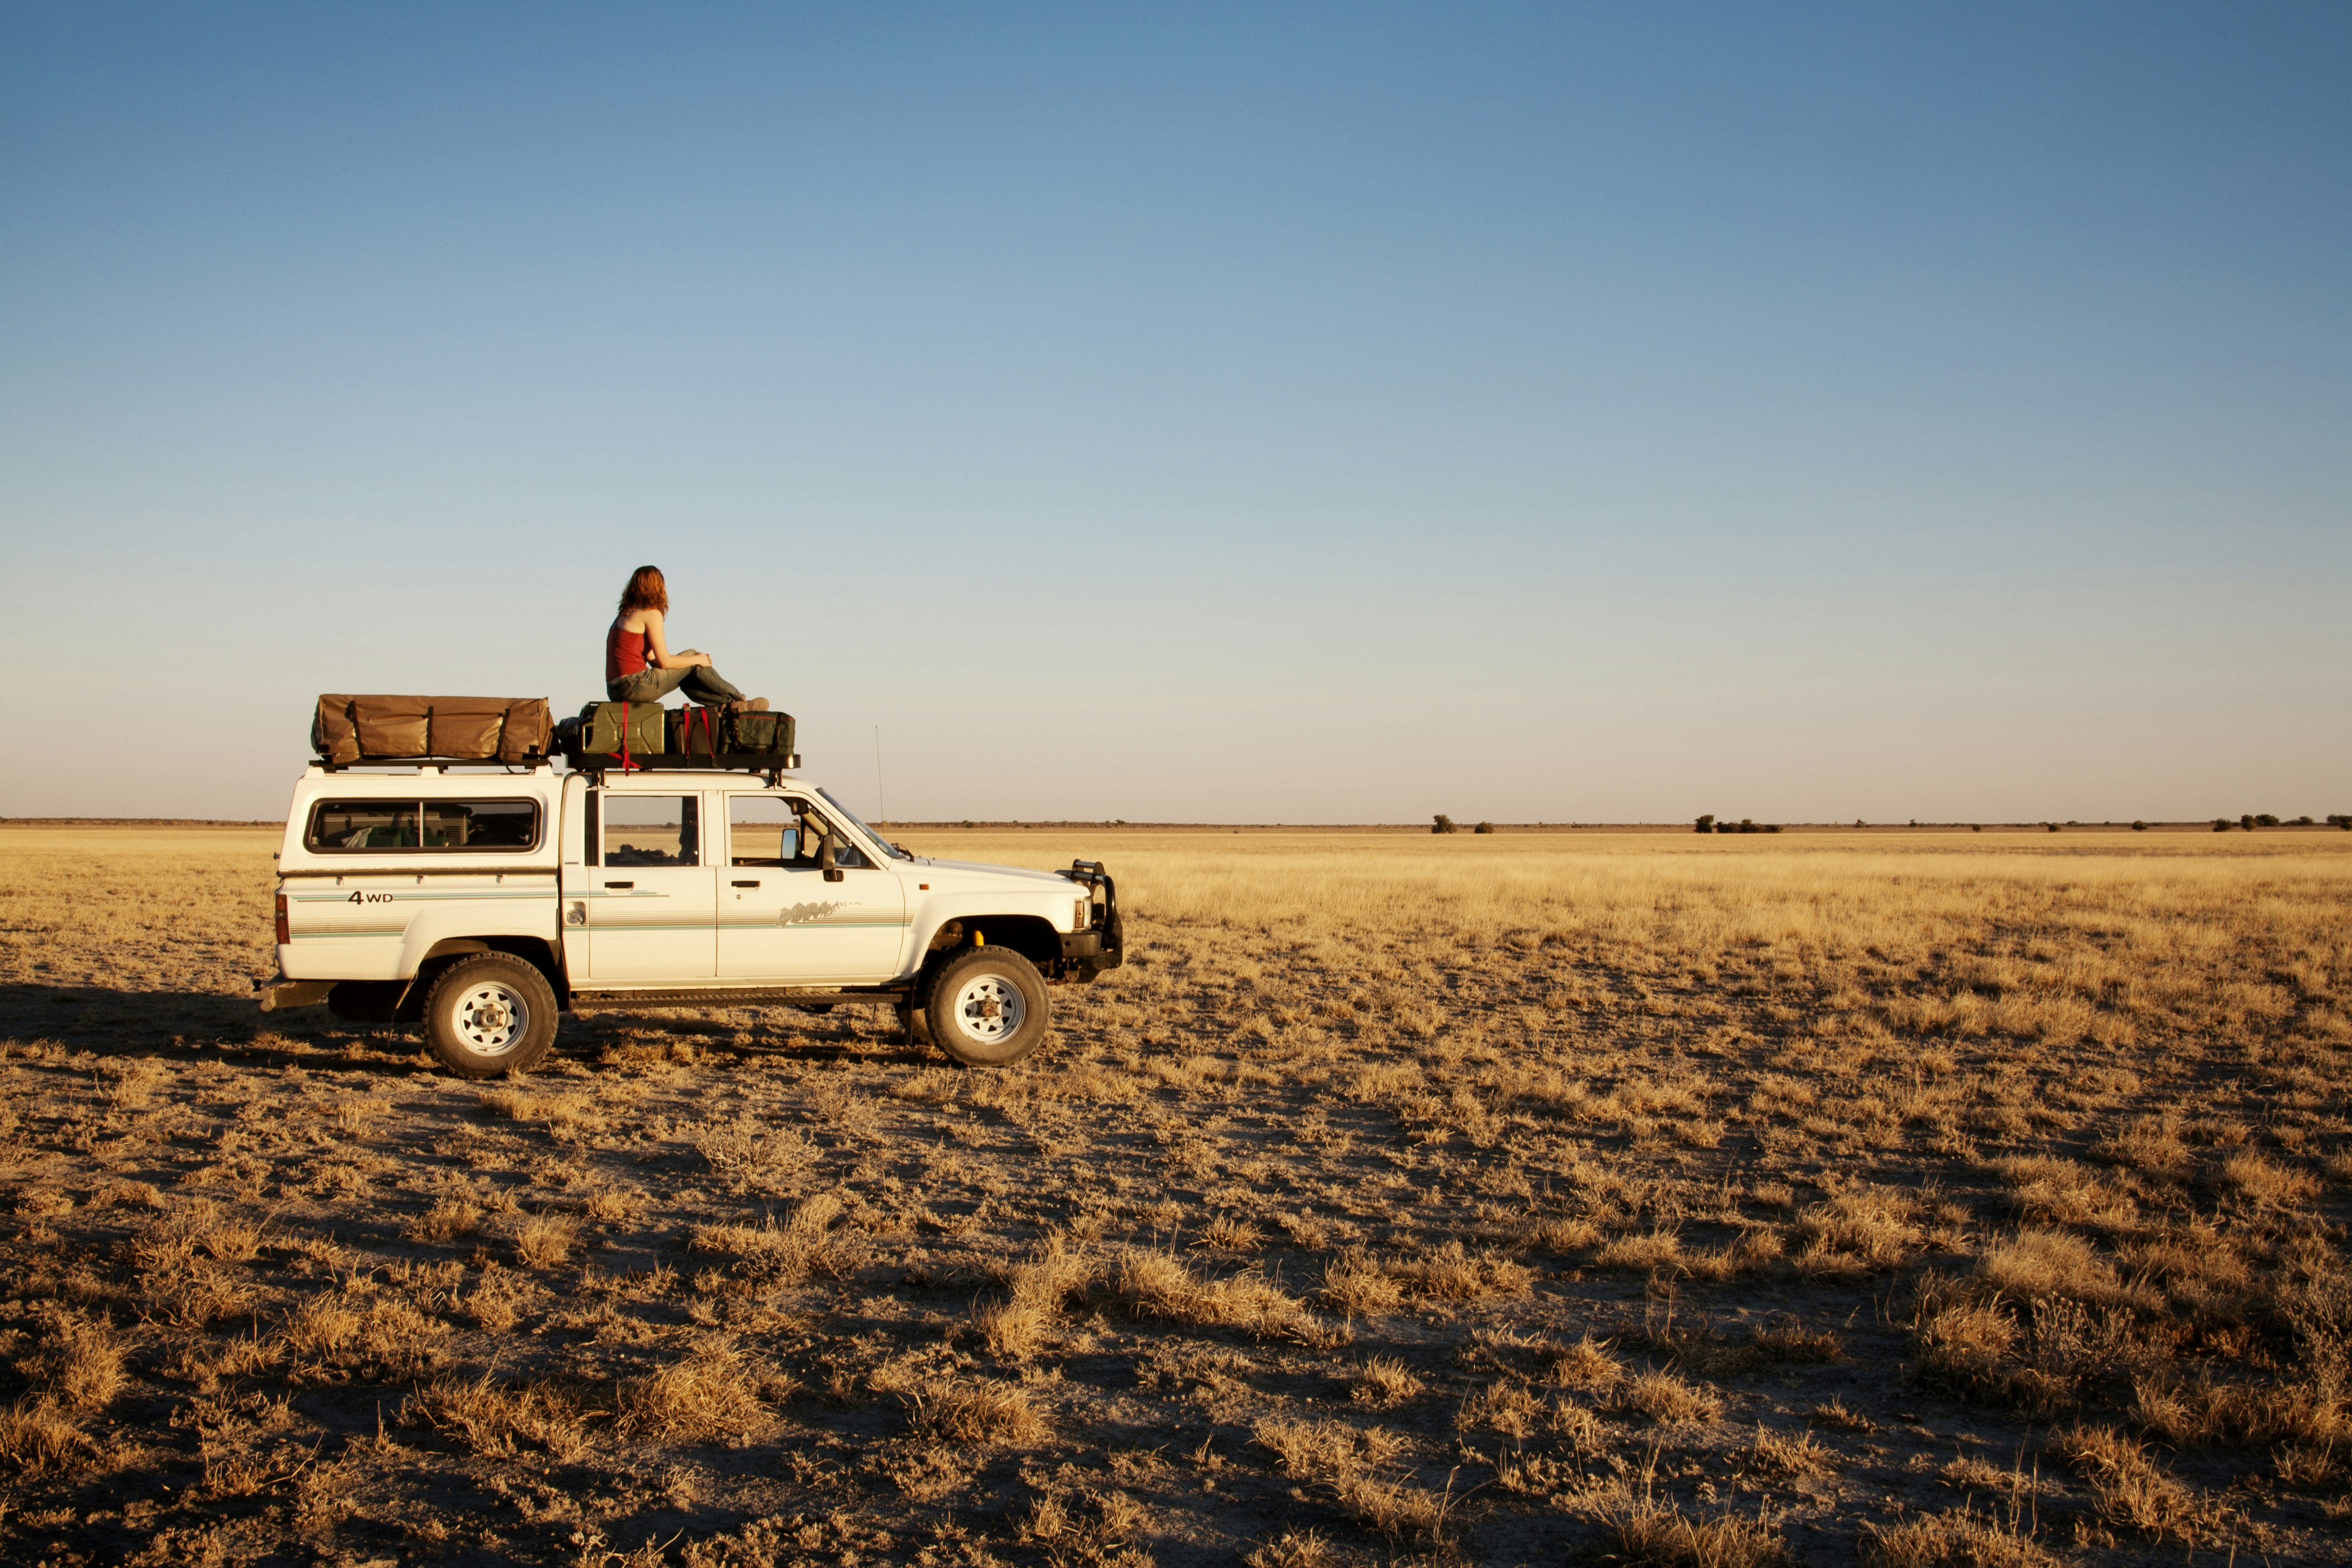 A woman sits on the roof of an off-road vehicle in open grassland